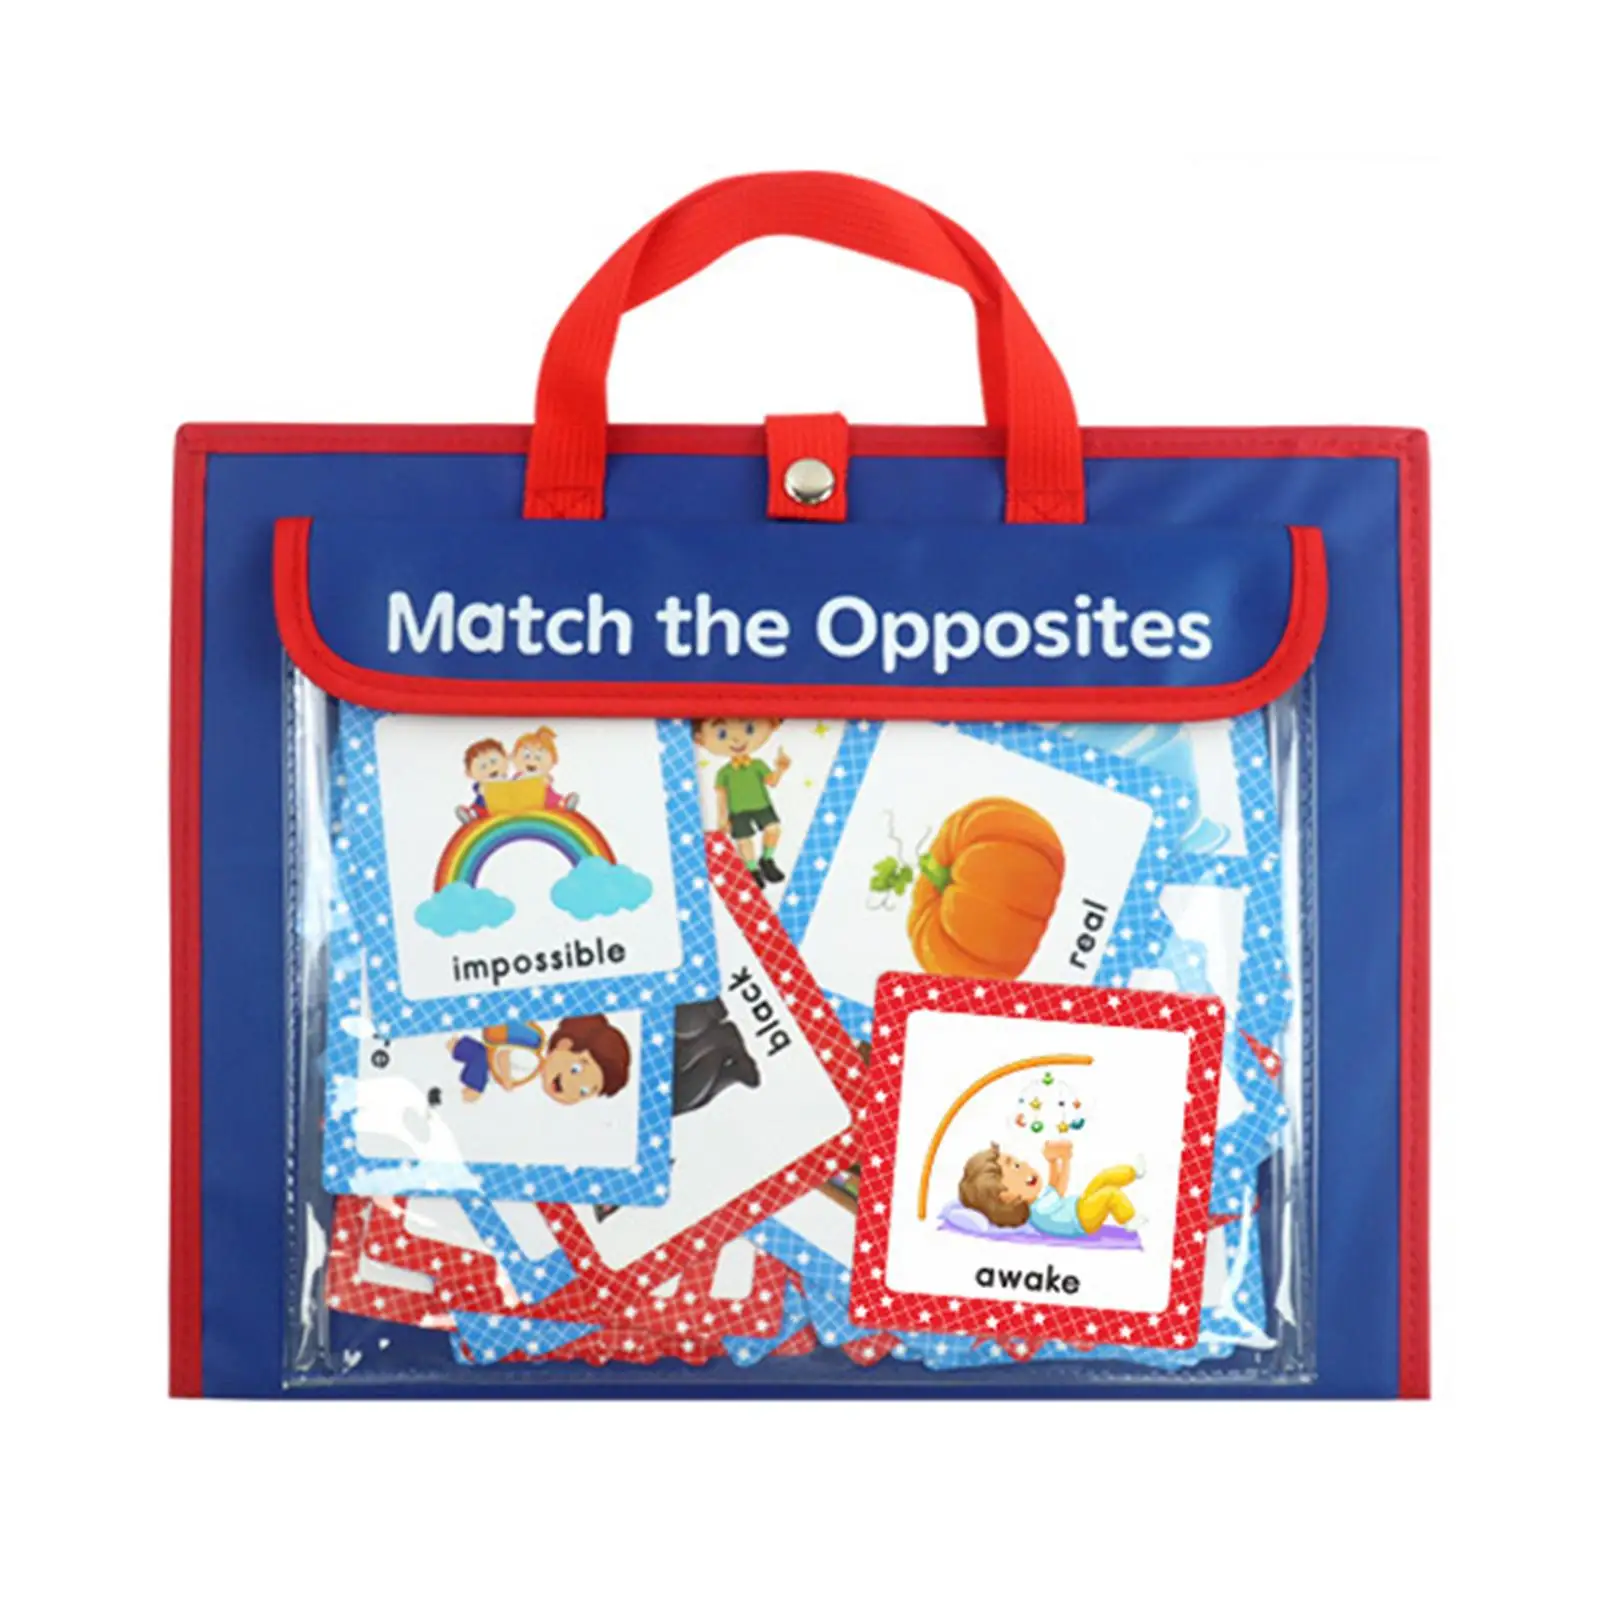 Opposites English Word Card Learning Toy Educational Toys Flashcards Cognitive Matching Puzzle Game for Classroom Kindergarten